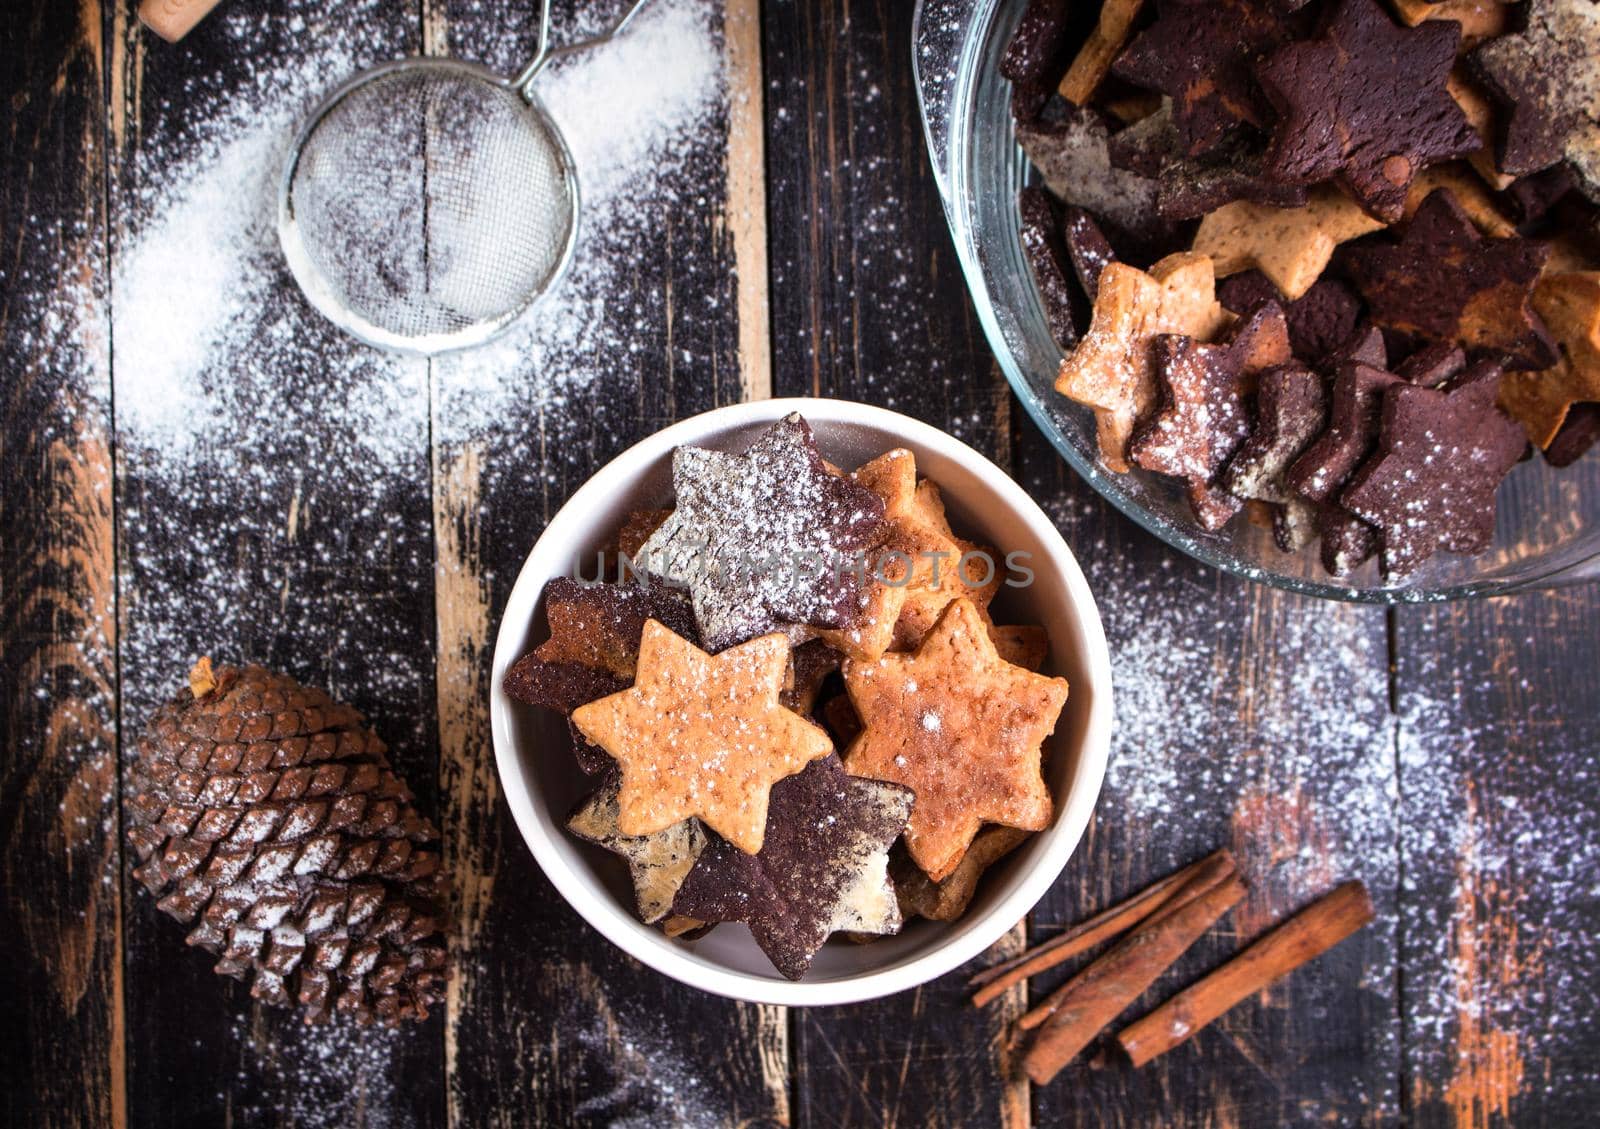 Assorted christmas ginger cookies on plate with cinnamon sticks, pinecones over dark wooden table. Six pointed star cookies